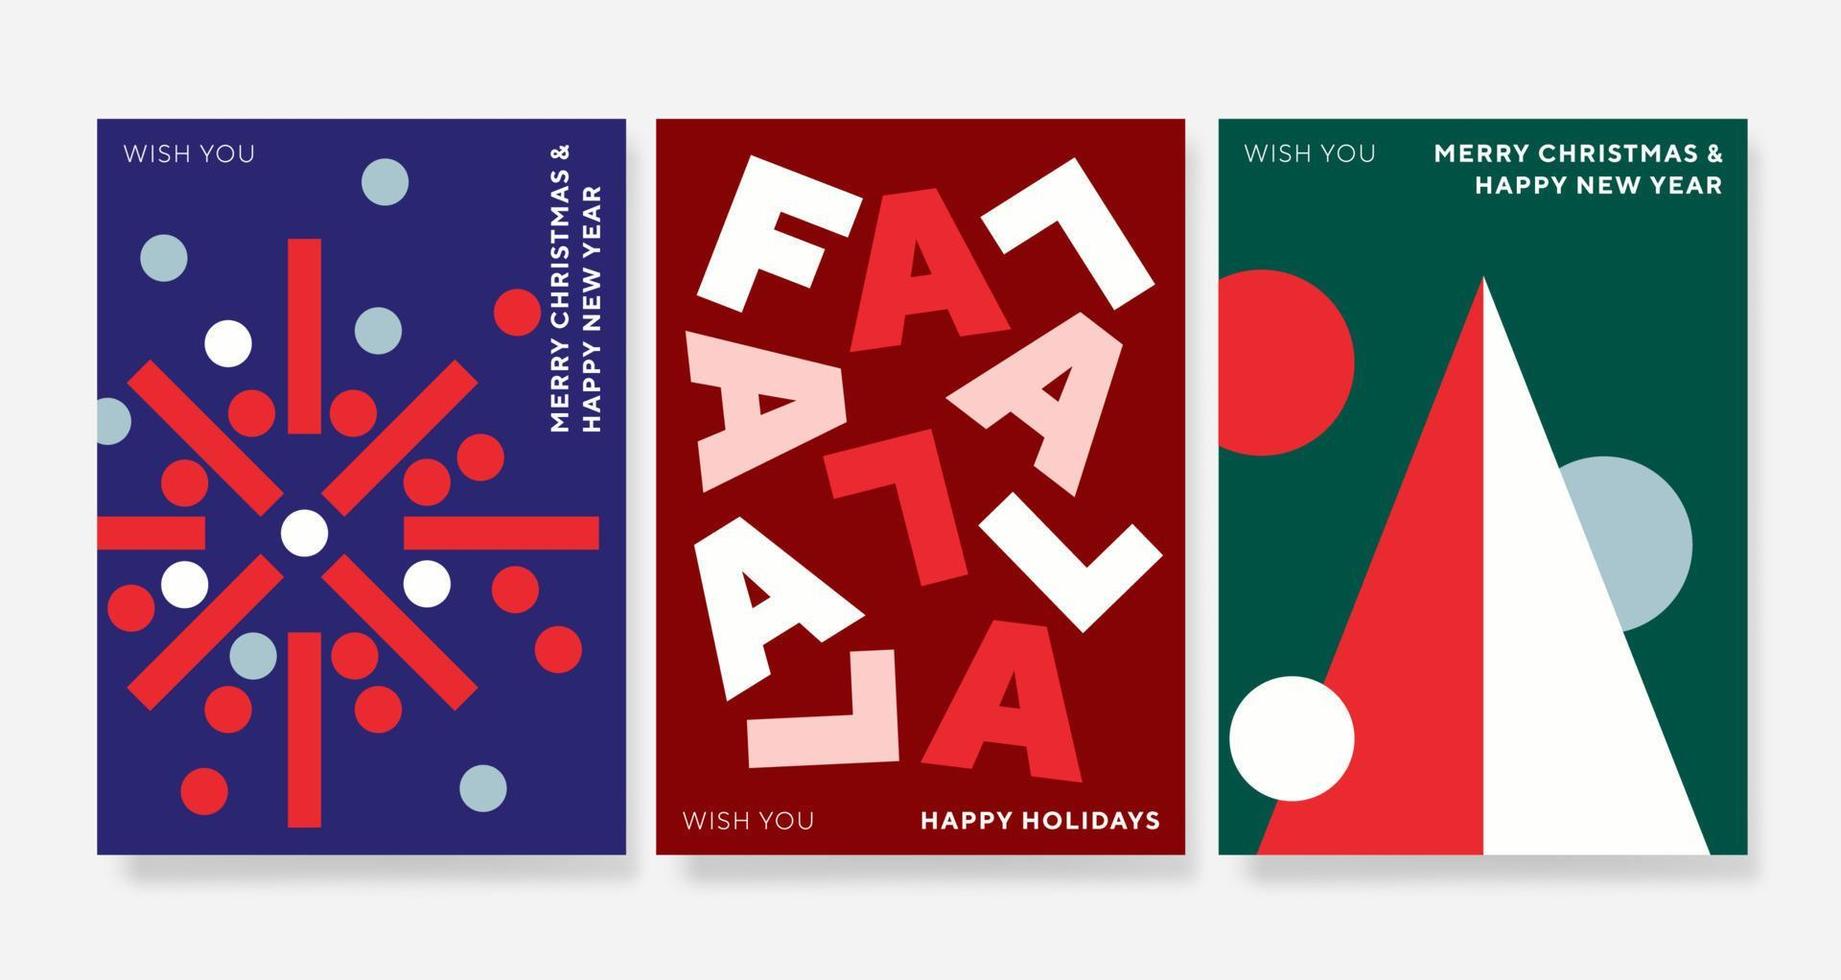 Merry Christmas and Happy New Year abstract geometric card design set. Modern flat minimalist style. Merry Christmas invitation, poster, greeting card vector